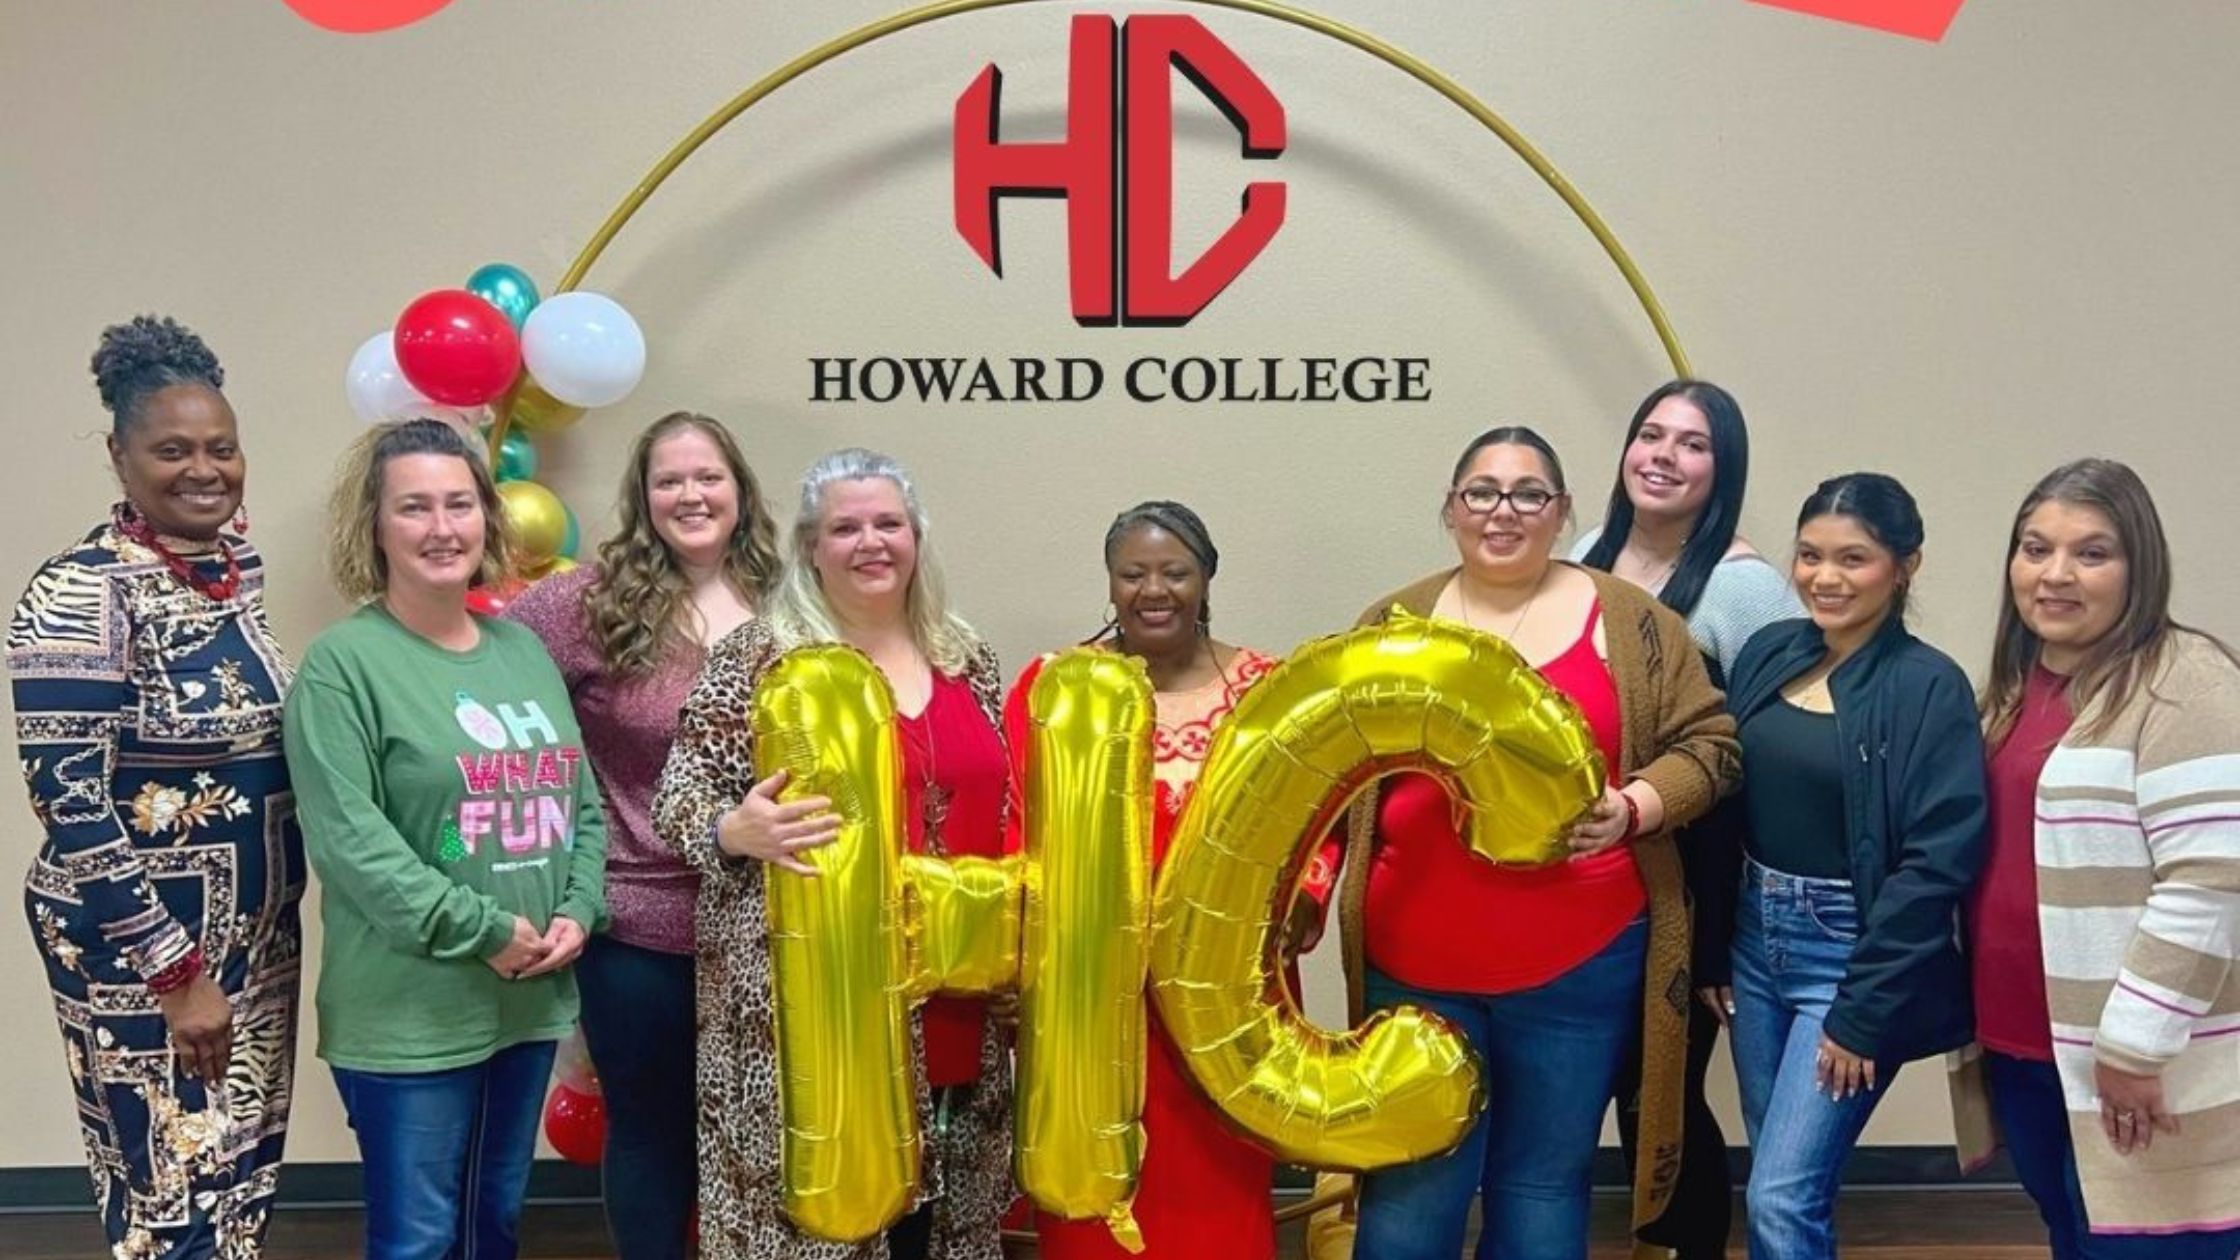 Cottage staff members pose for a group photo with gold balloon "HC" letters